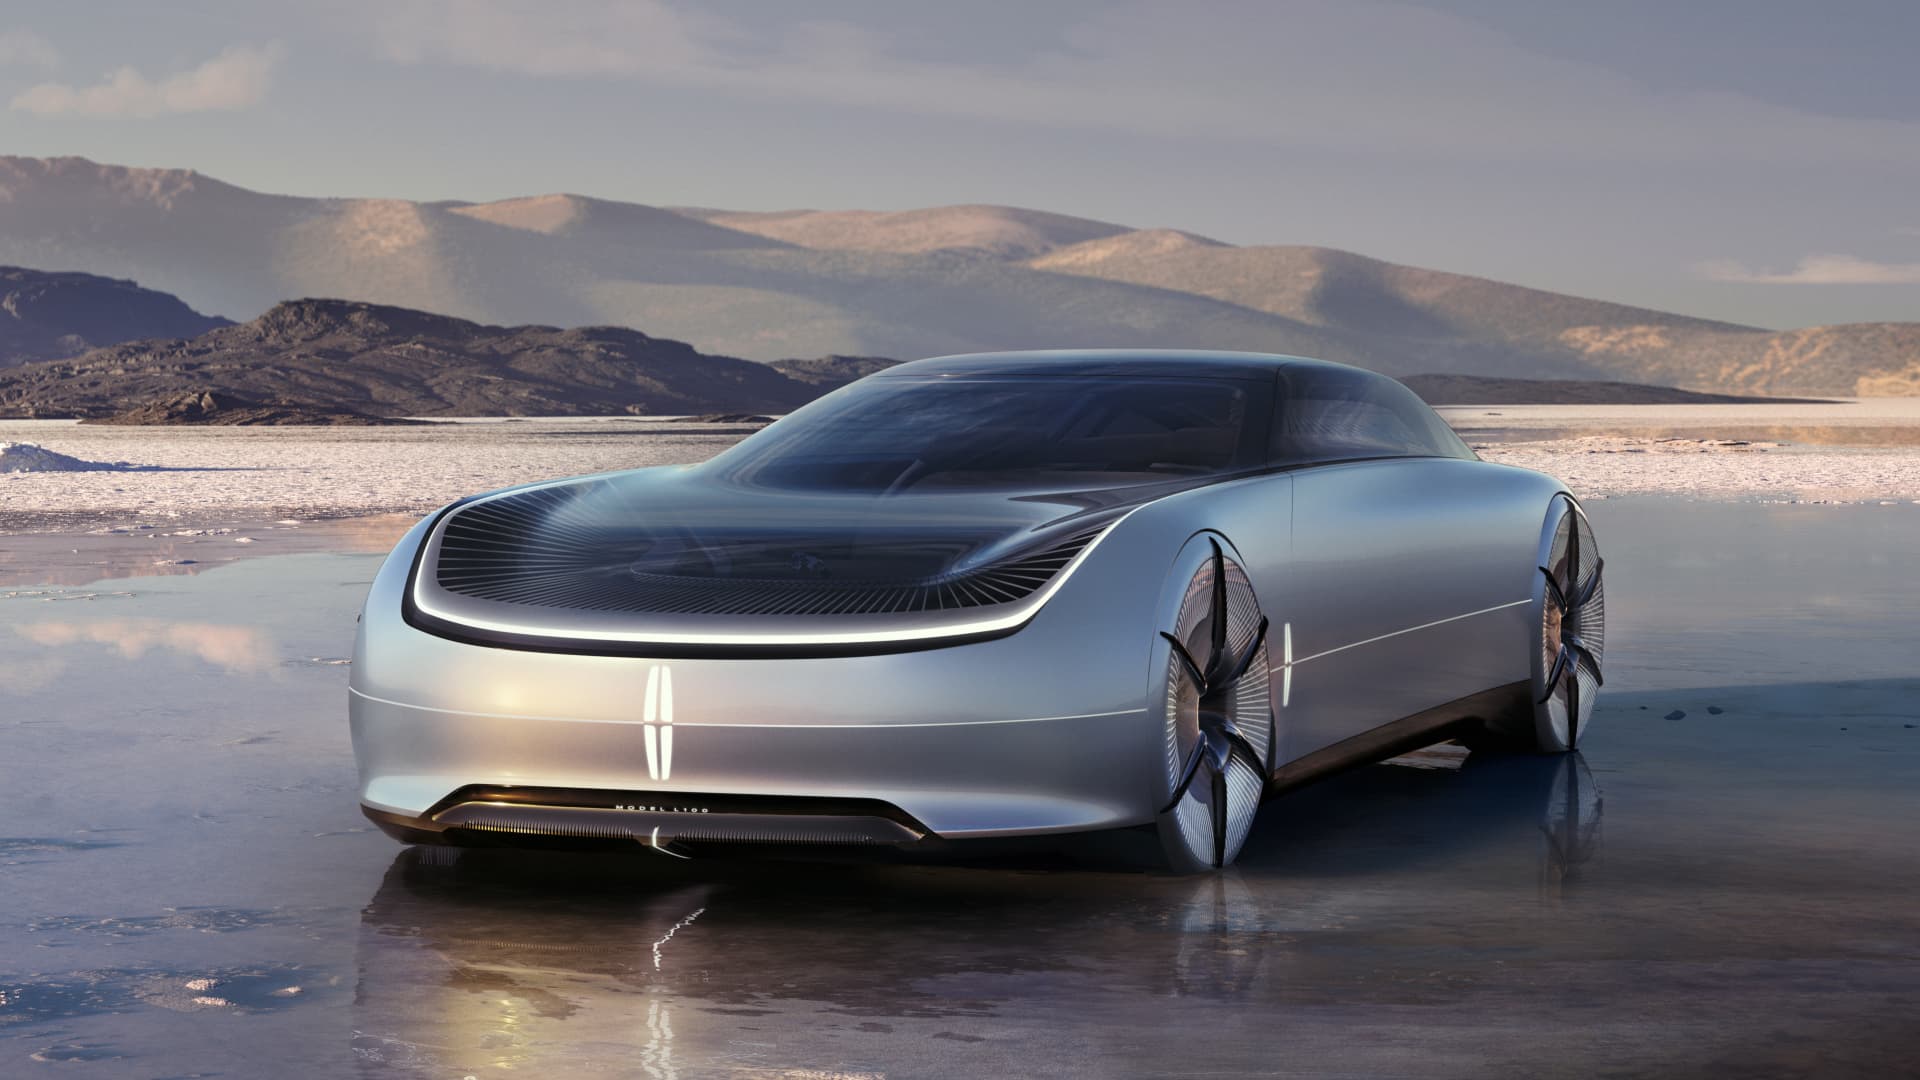 Take a look at Ford’s futuristic vision for its luxury Lincoln brand